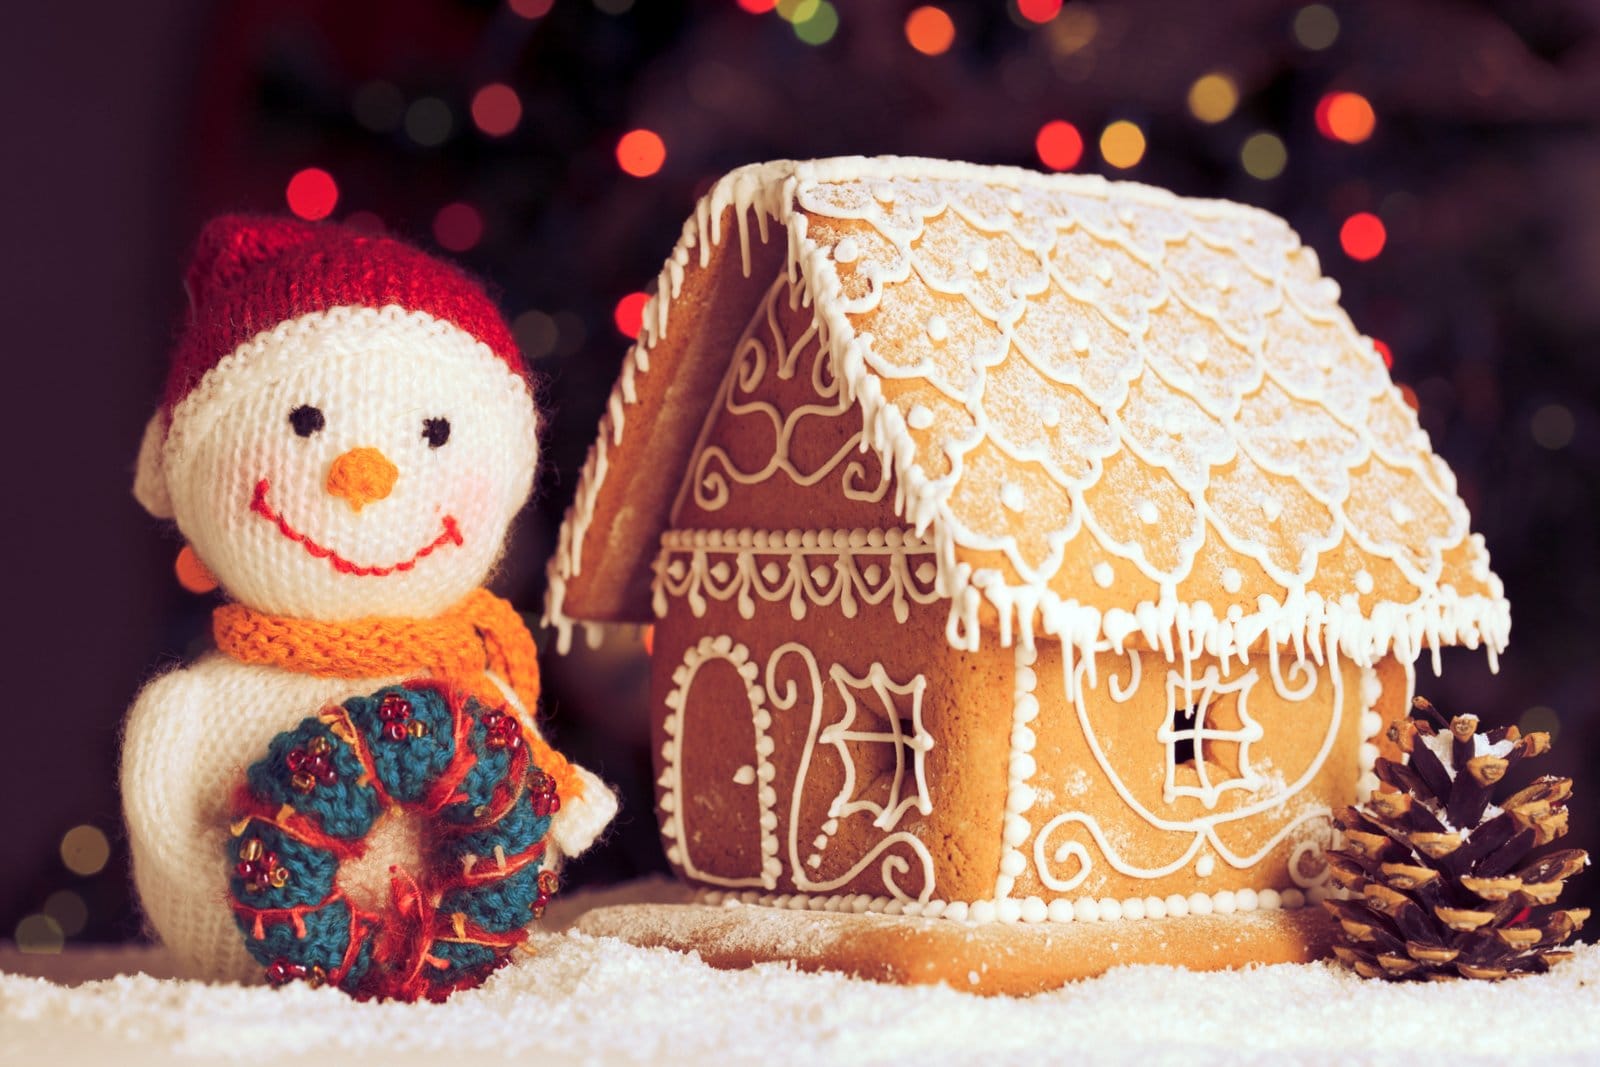 Beautiful gingerbread house with a toy snowman